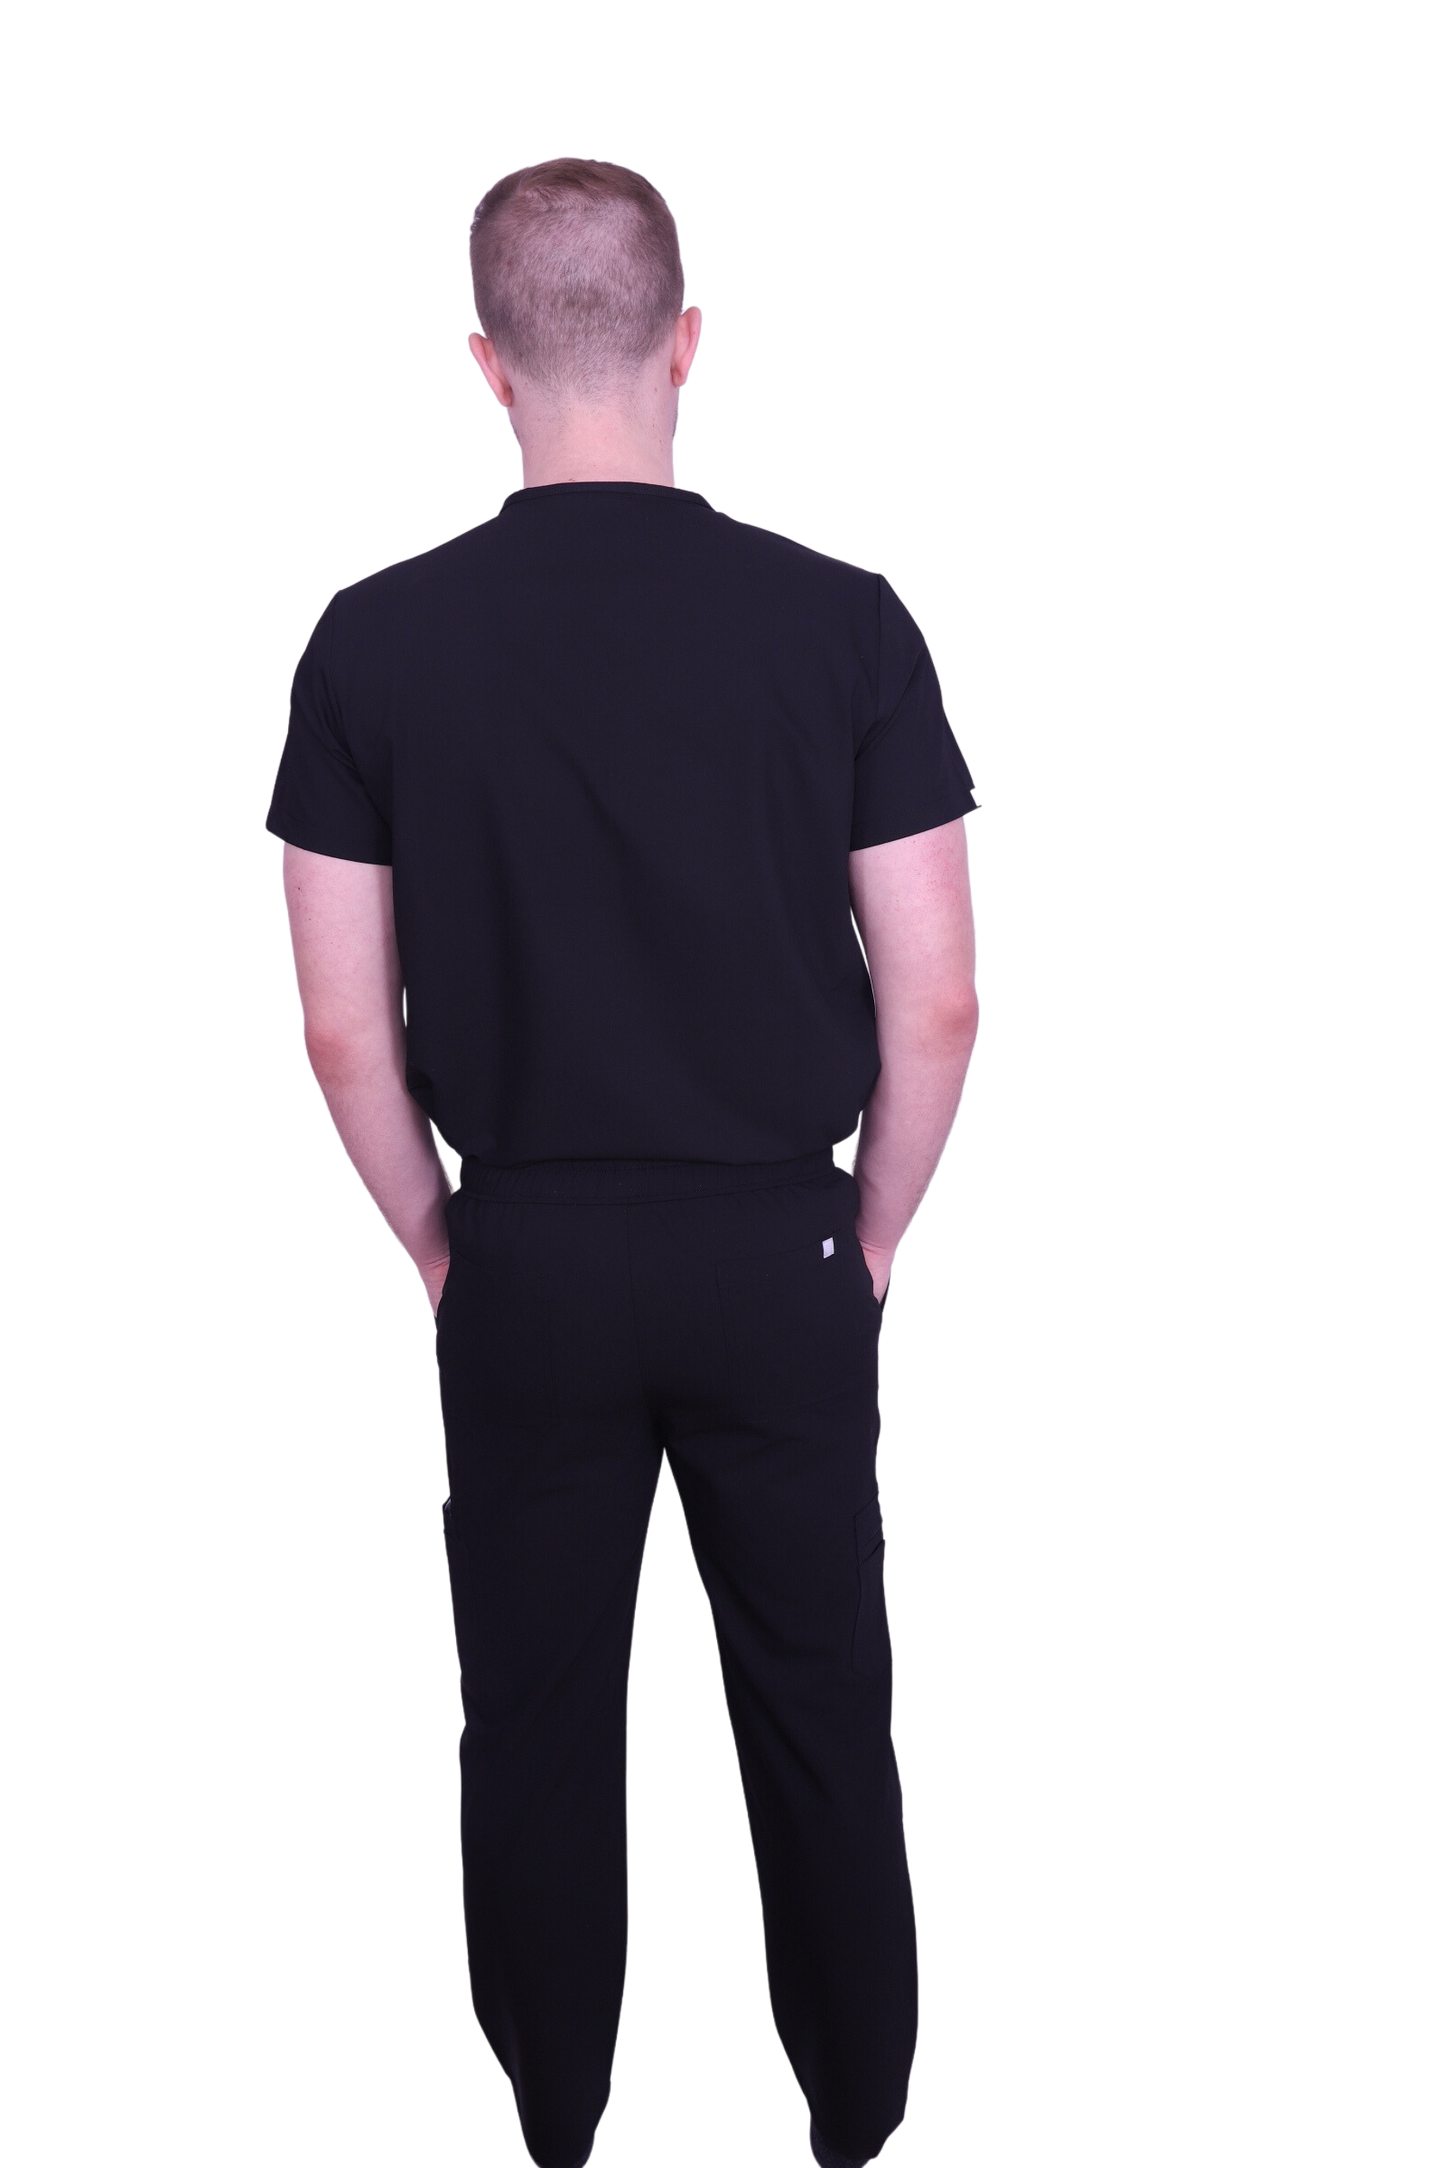 Elevate your work collection with the Scrubmates black classic scrub top for men made to pair perfectly with our classic straight leg pants. Our exclusive design is trend-forward while still delivering timeless and professional style. Made from a superior quality polyester/rayon/spandex fabric blend, this set offers unparalleled all-day comfort and allows for ease of movement. Our thoughtful and innovative design offers 2 chest pockets as well as a pen pocket.best scrubs for men figs scrubs